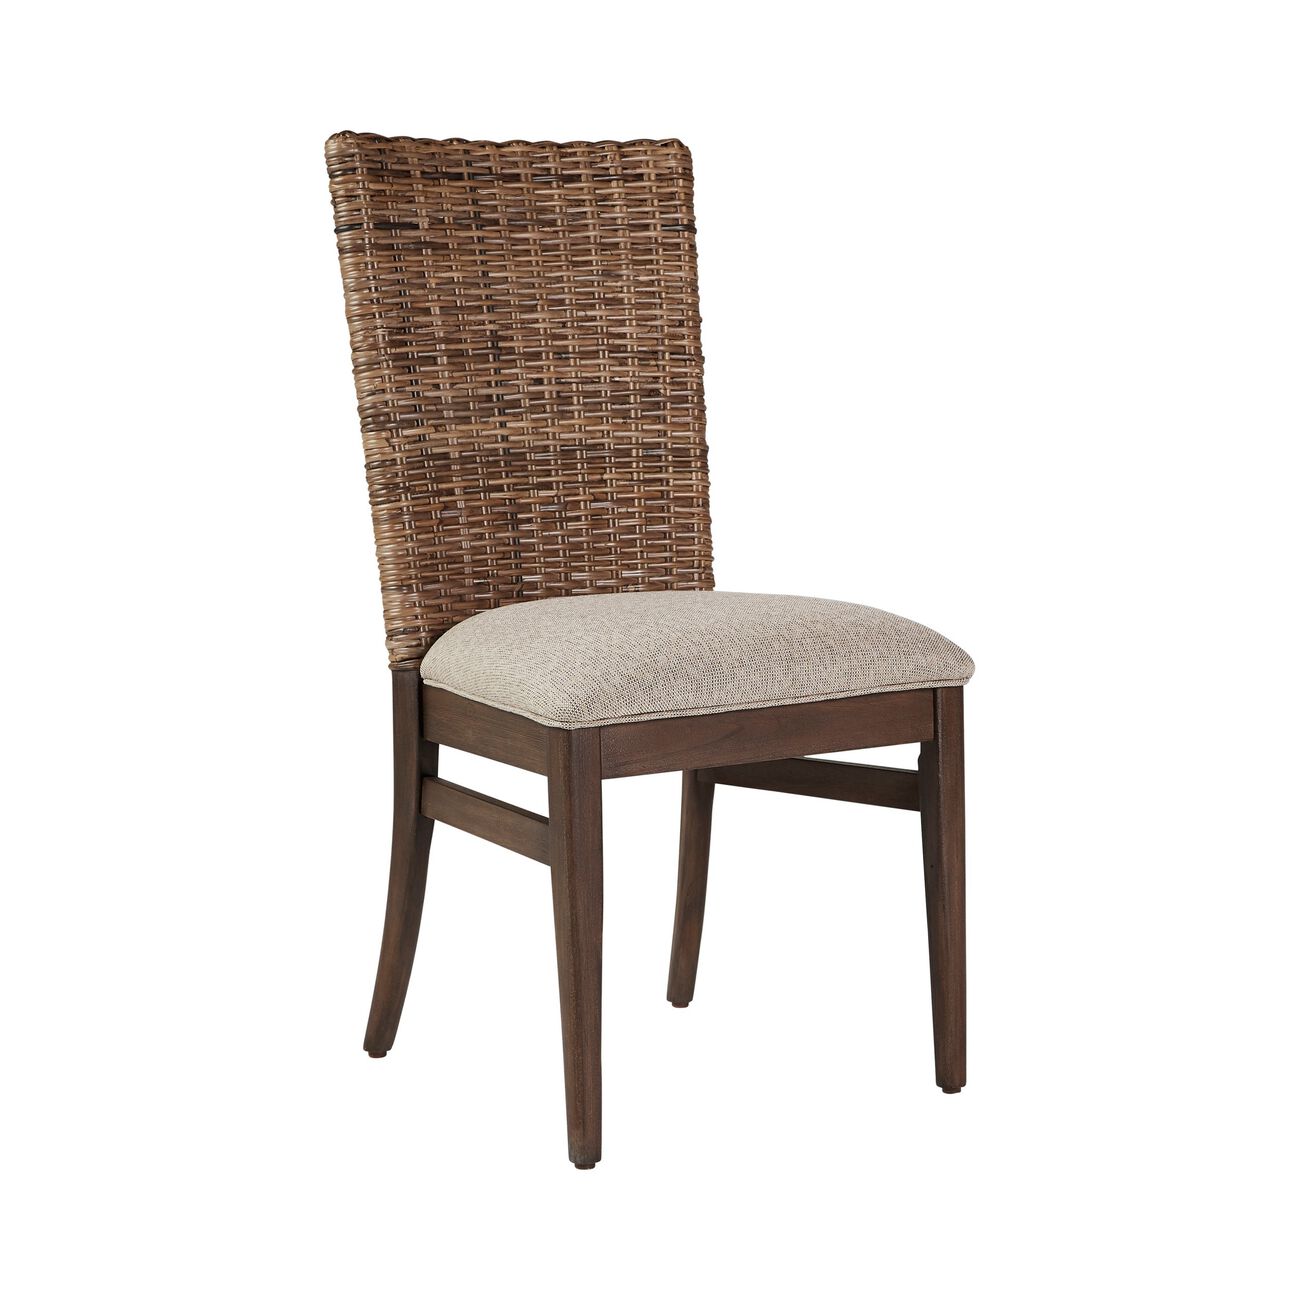 Kubu Woven Back Dining Chair with Cushion Seat, Set of 2, Brown